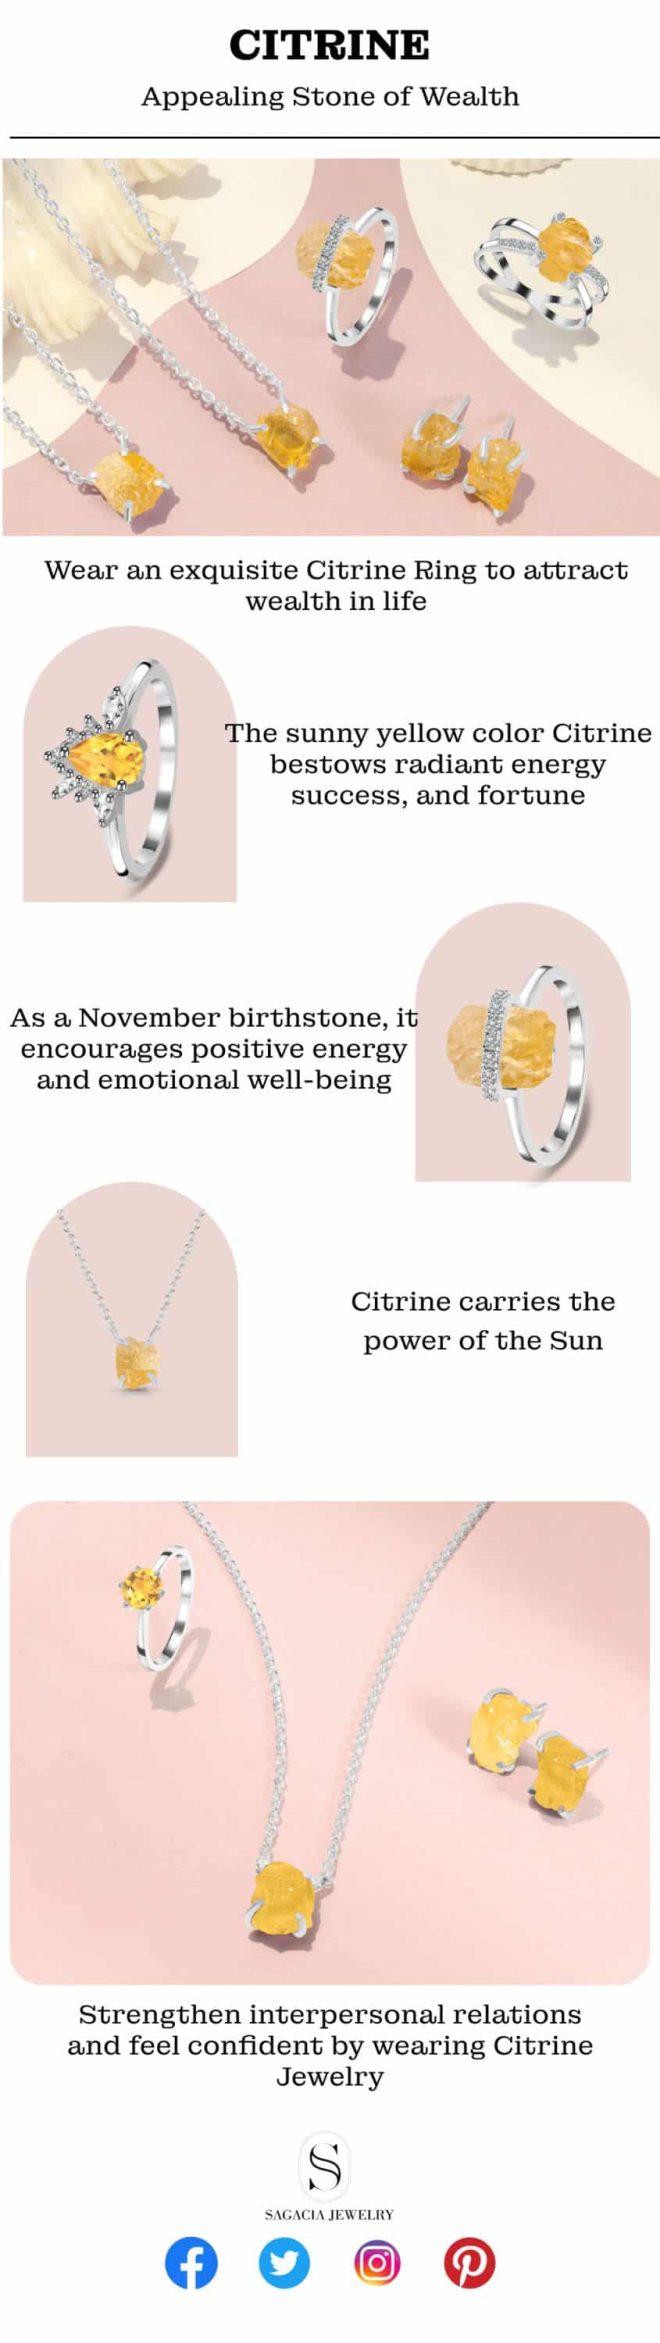 Citrine - Appealing Stone of Wealth